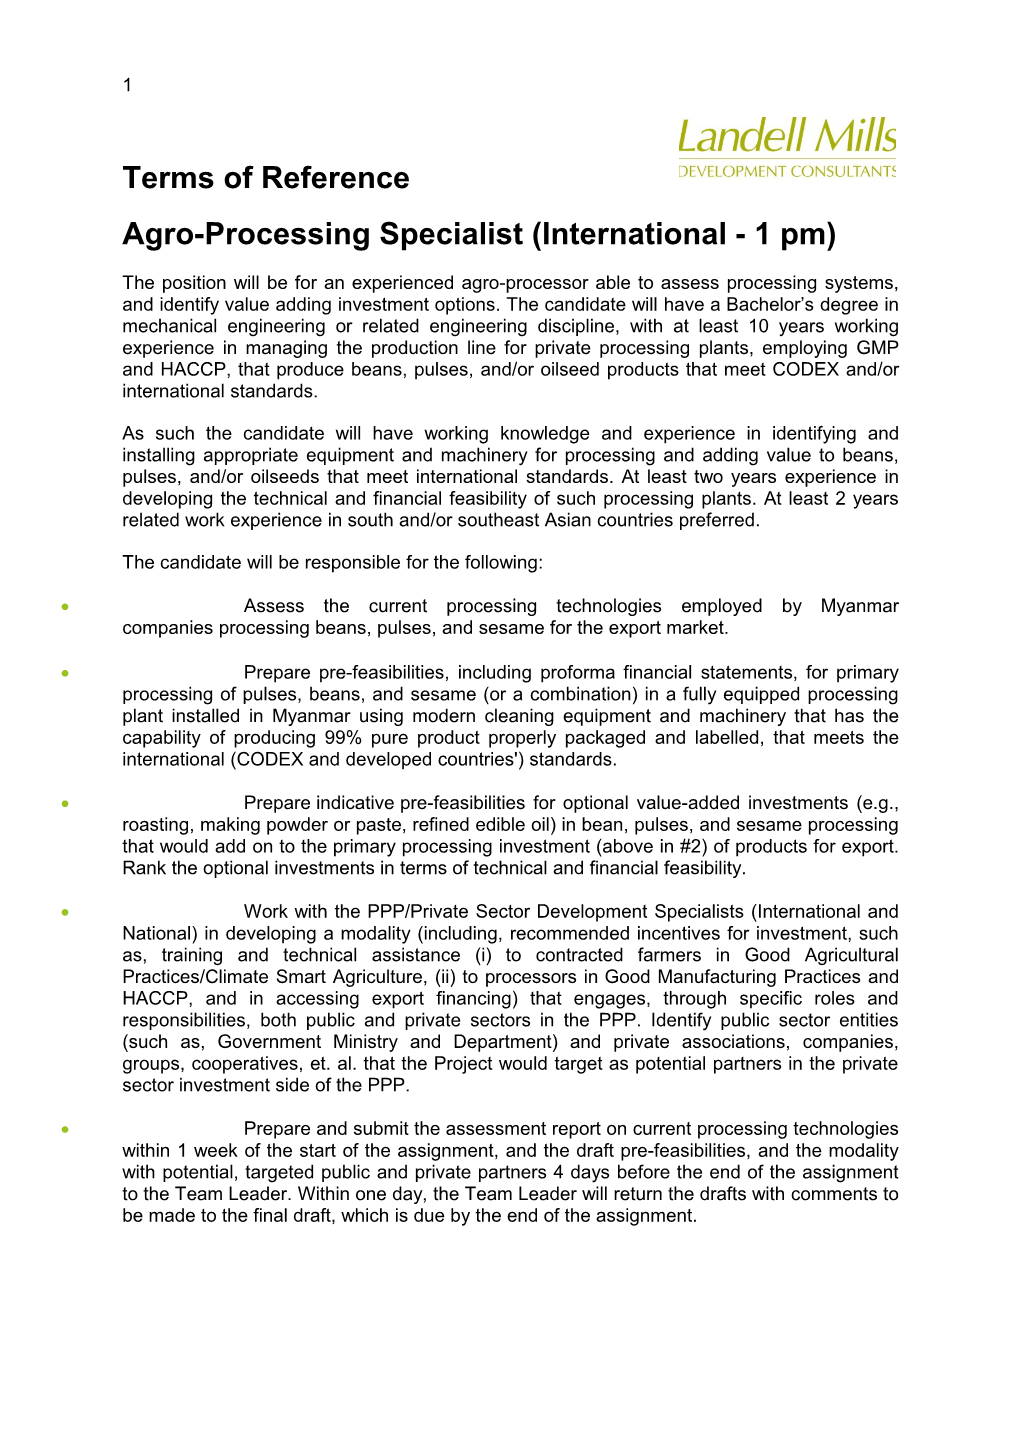 Agro-Processing Specialist (International - 1 Pm)